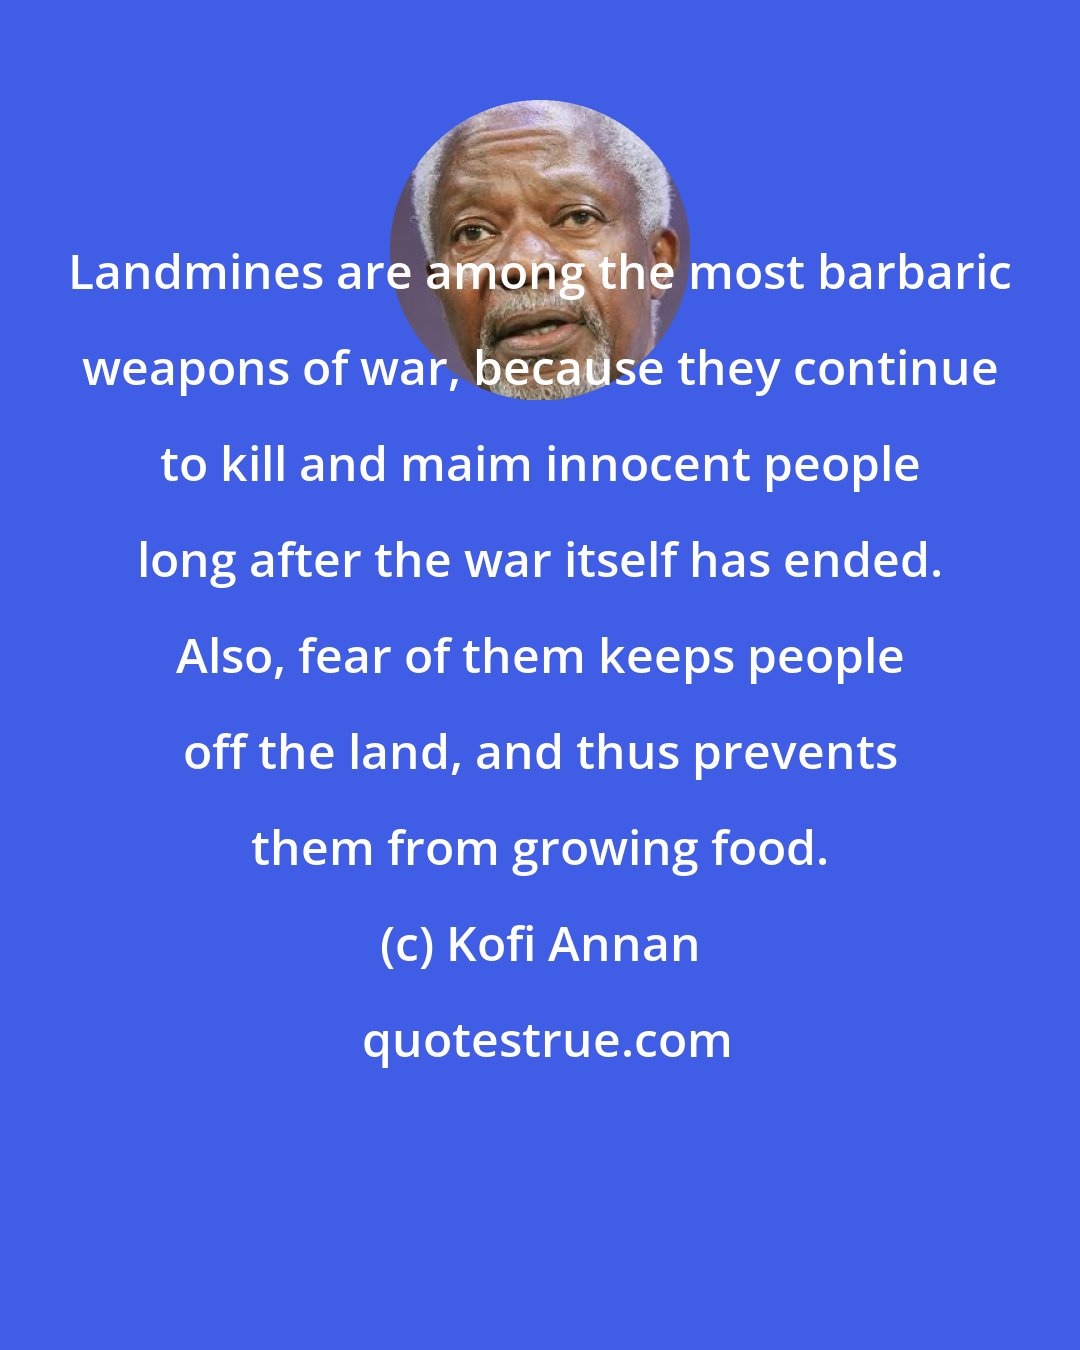 Kofi Annan: Landmines are among the most barbaric weapons of war, because they continue to kill and maim innocent people long after the war itself has ended. Also, fear of them keeps people off the land, and thus prevents them from growing food.